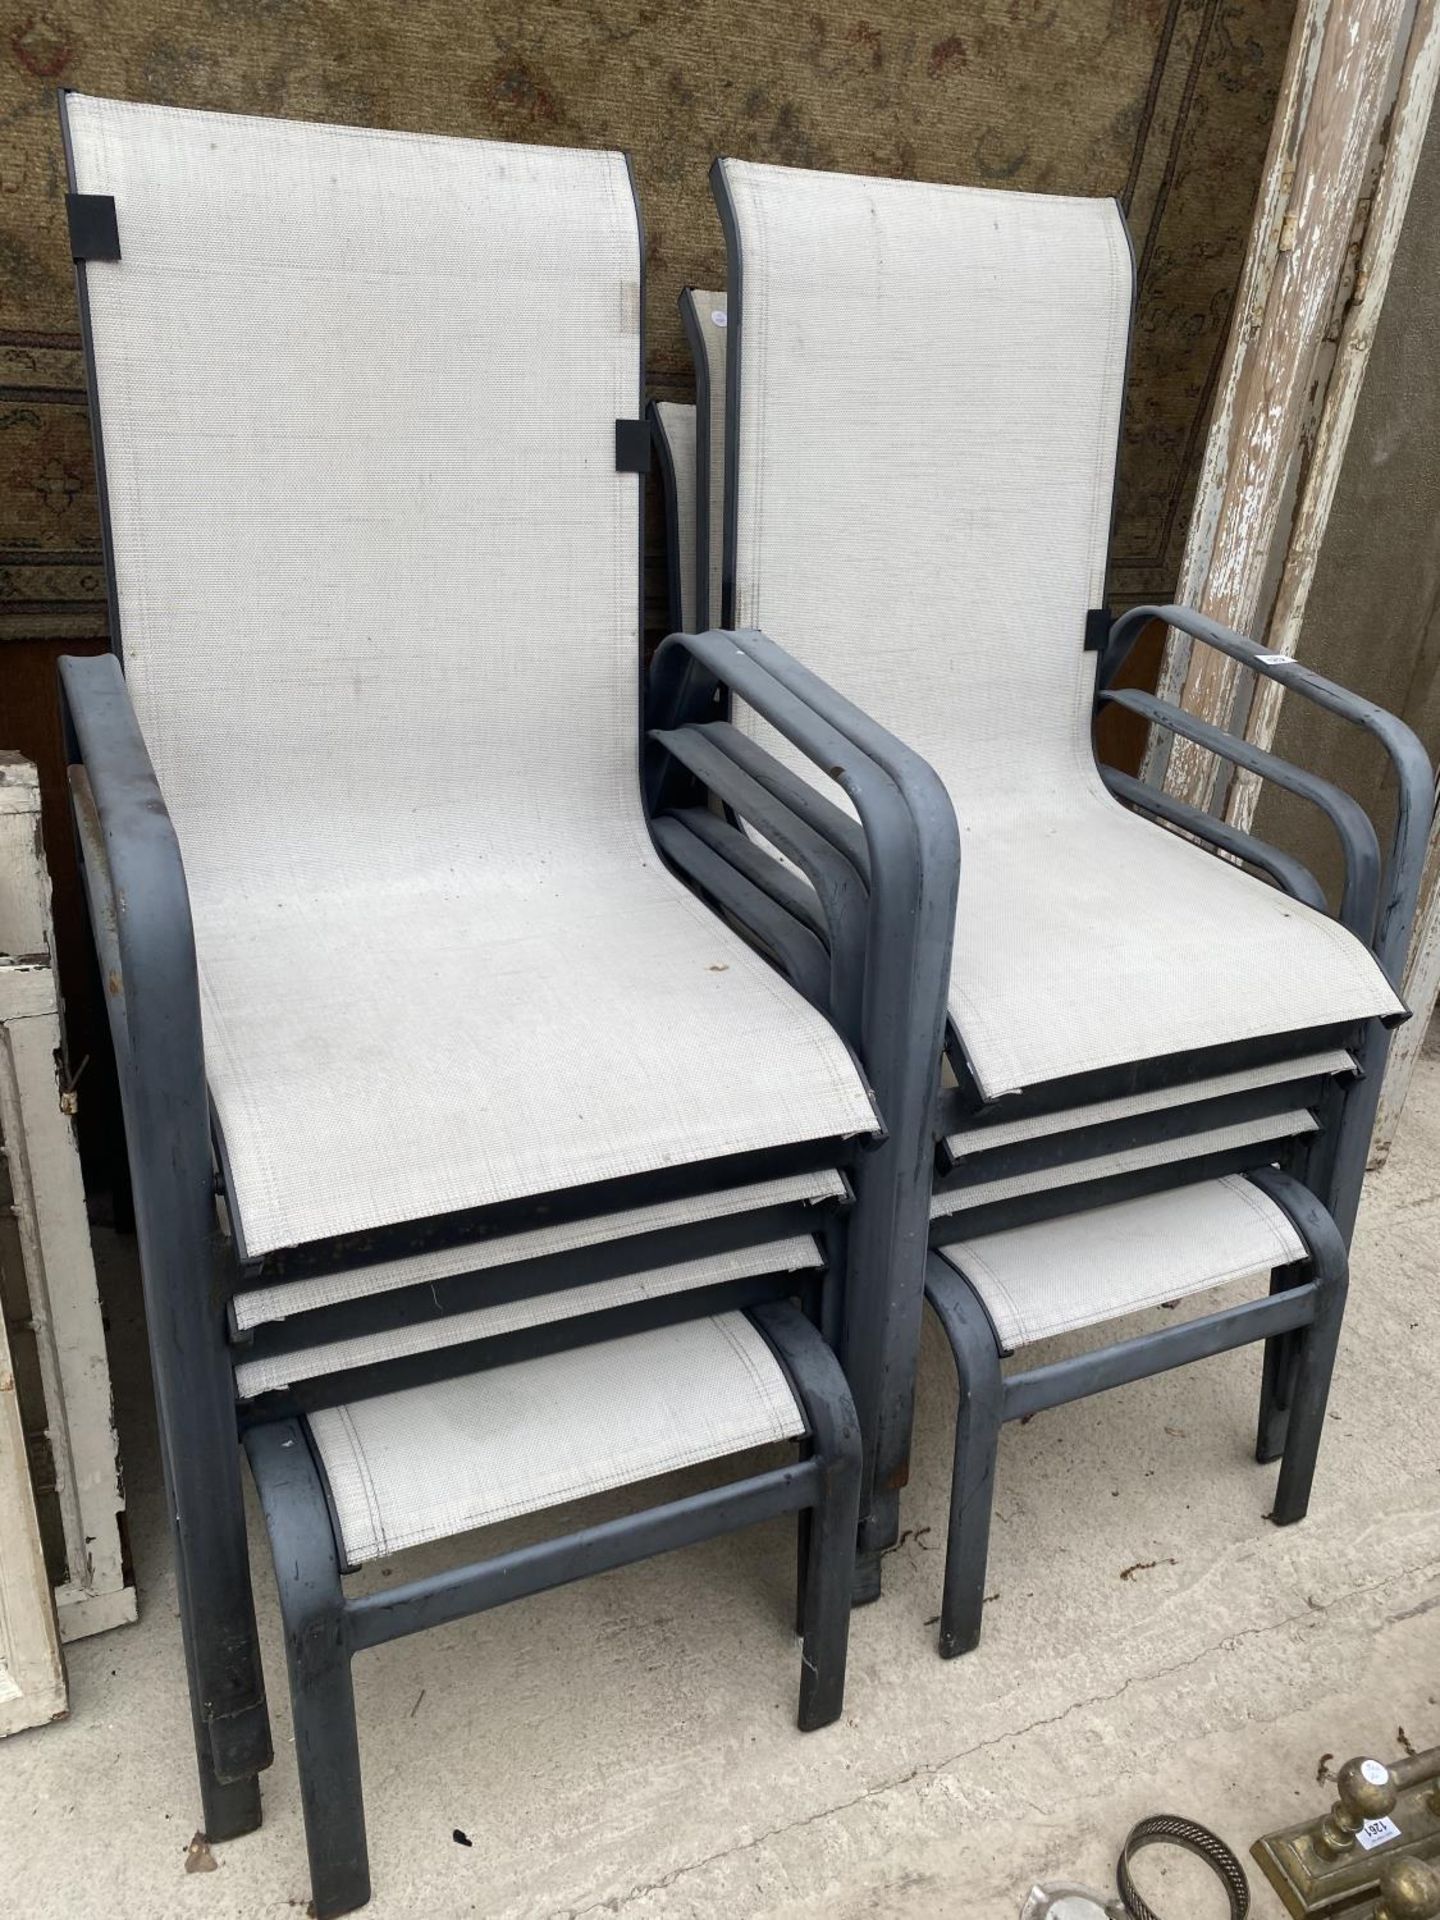 A GROUP OF SIX METAL FRAMED GARDEN CHAIRS TO INCLUDE TWO FOOT STOOLS - Image 2 of 3